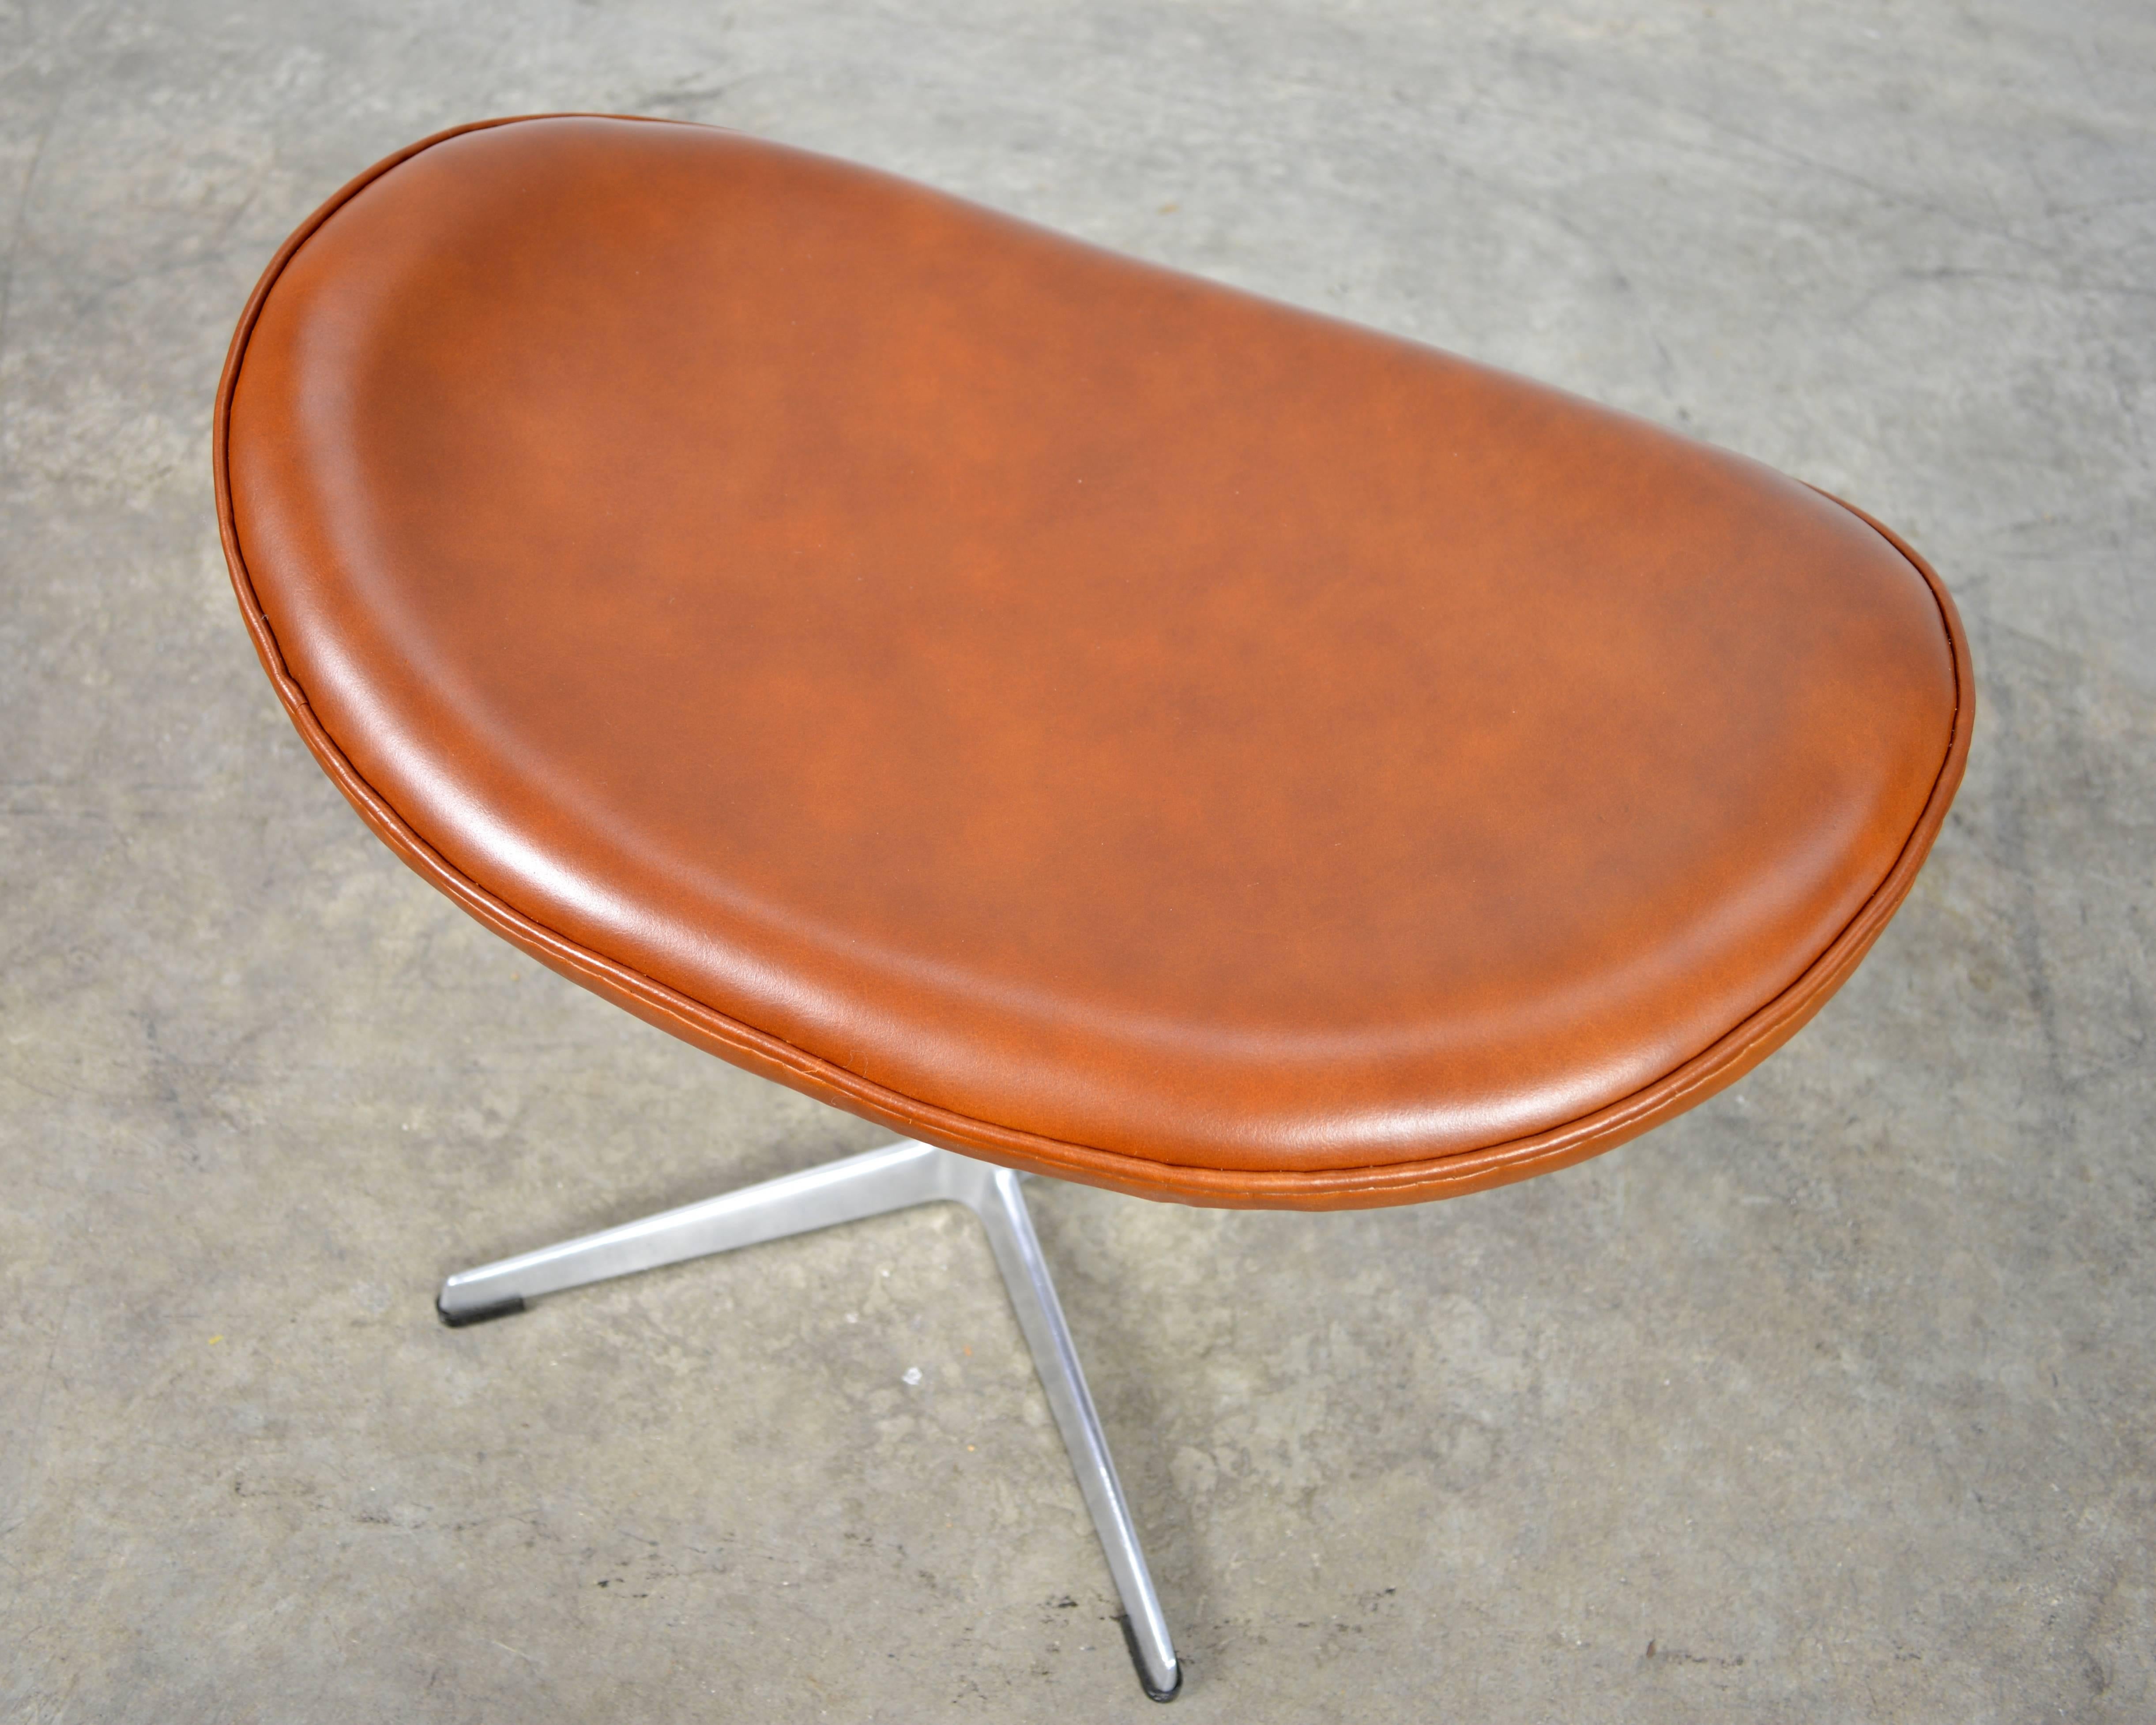 Arne Jacobsen Leather Egg Chair and Ottoman 1